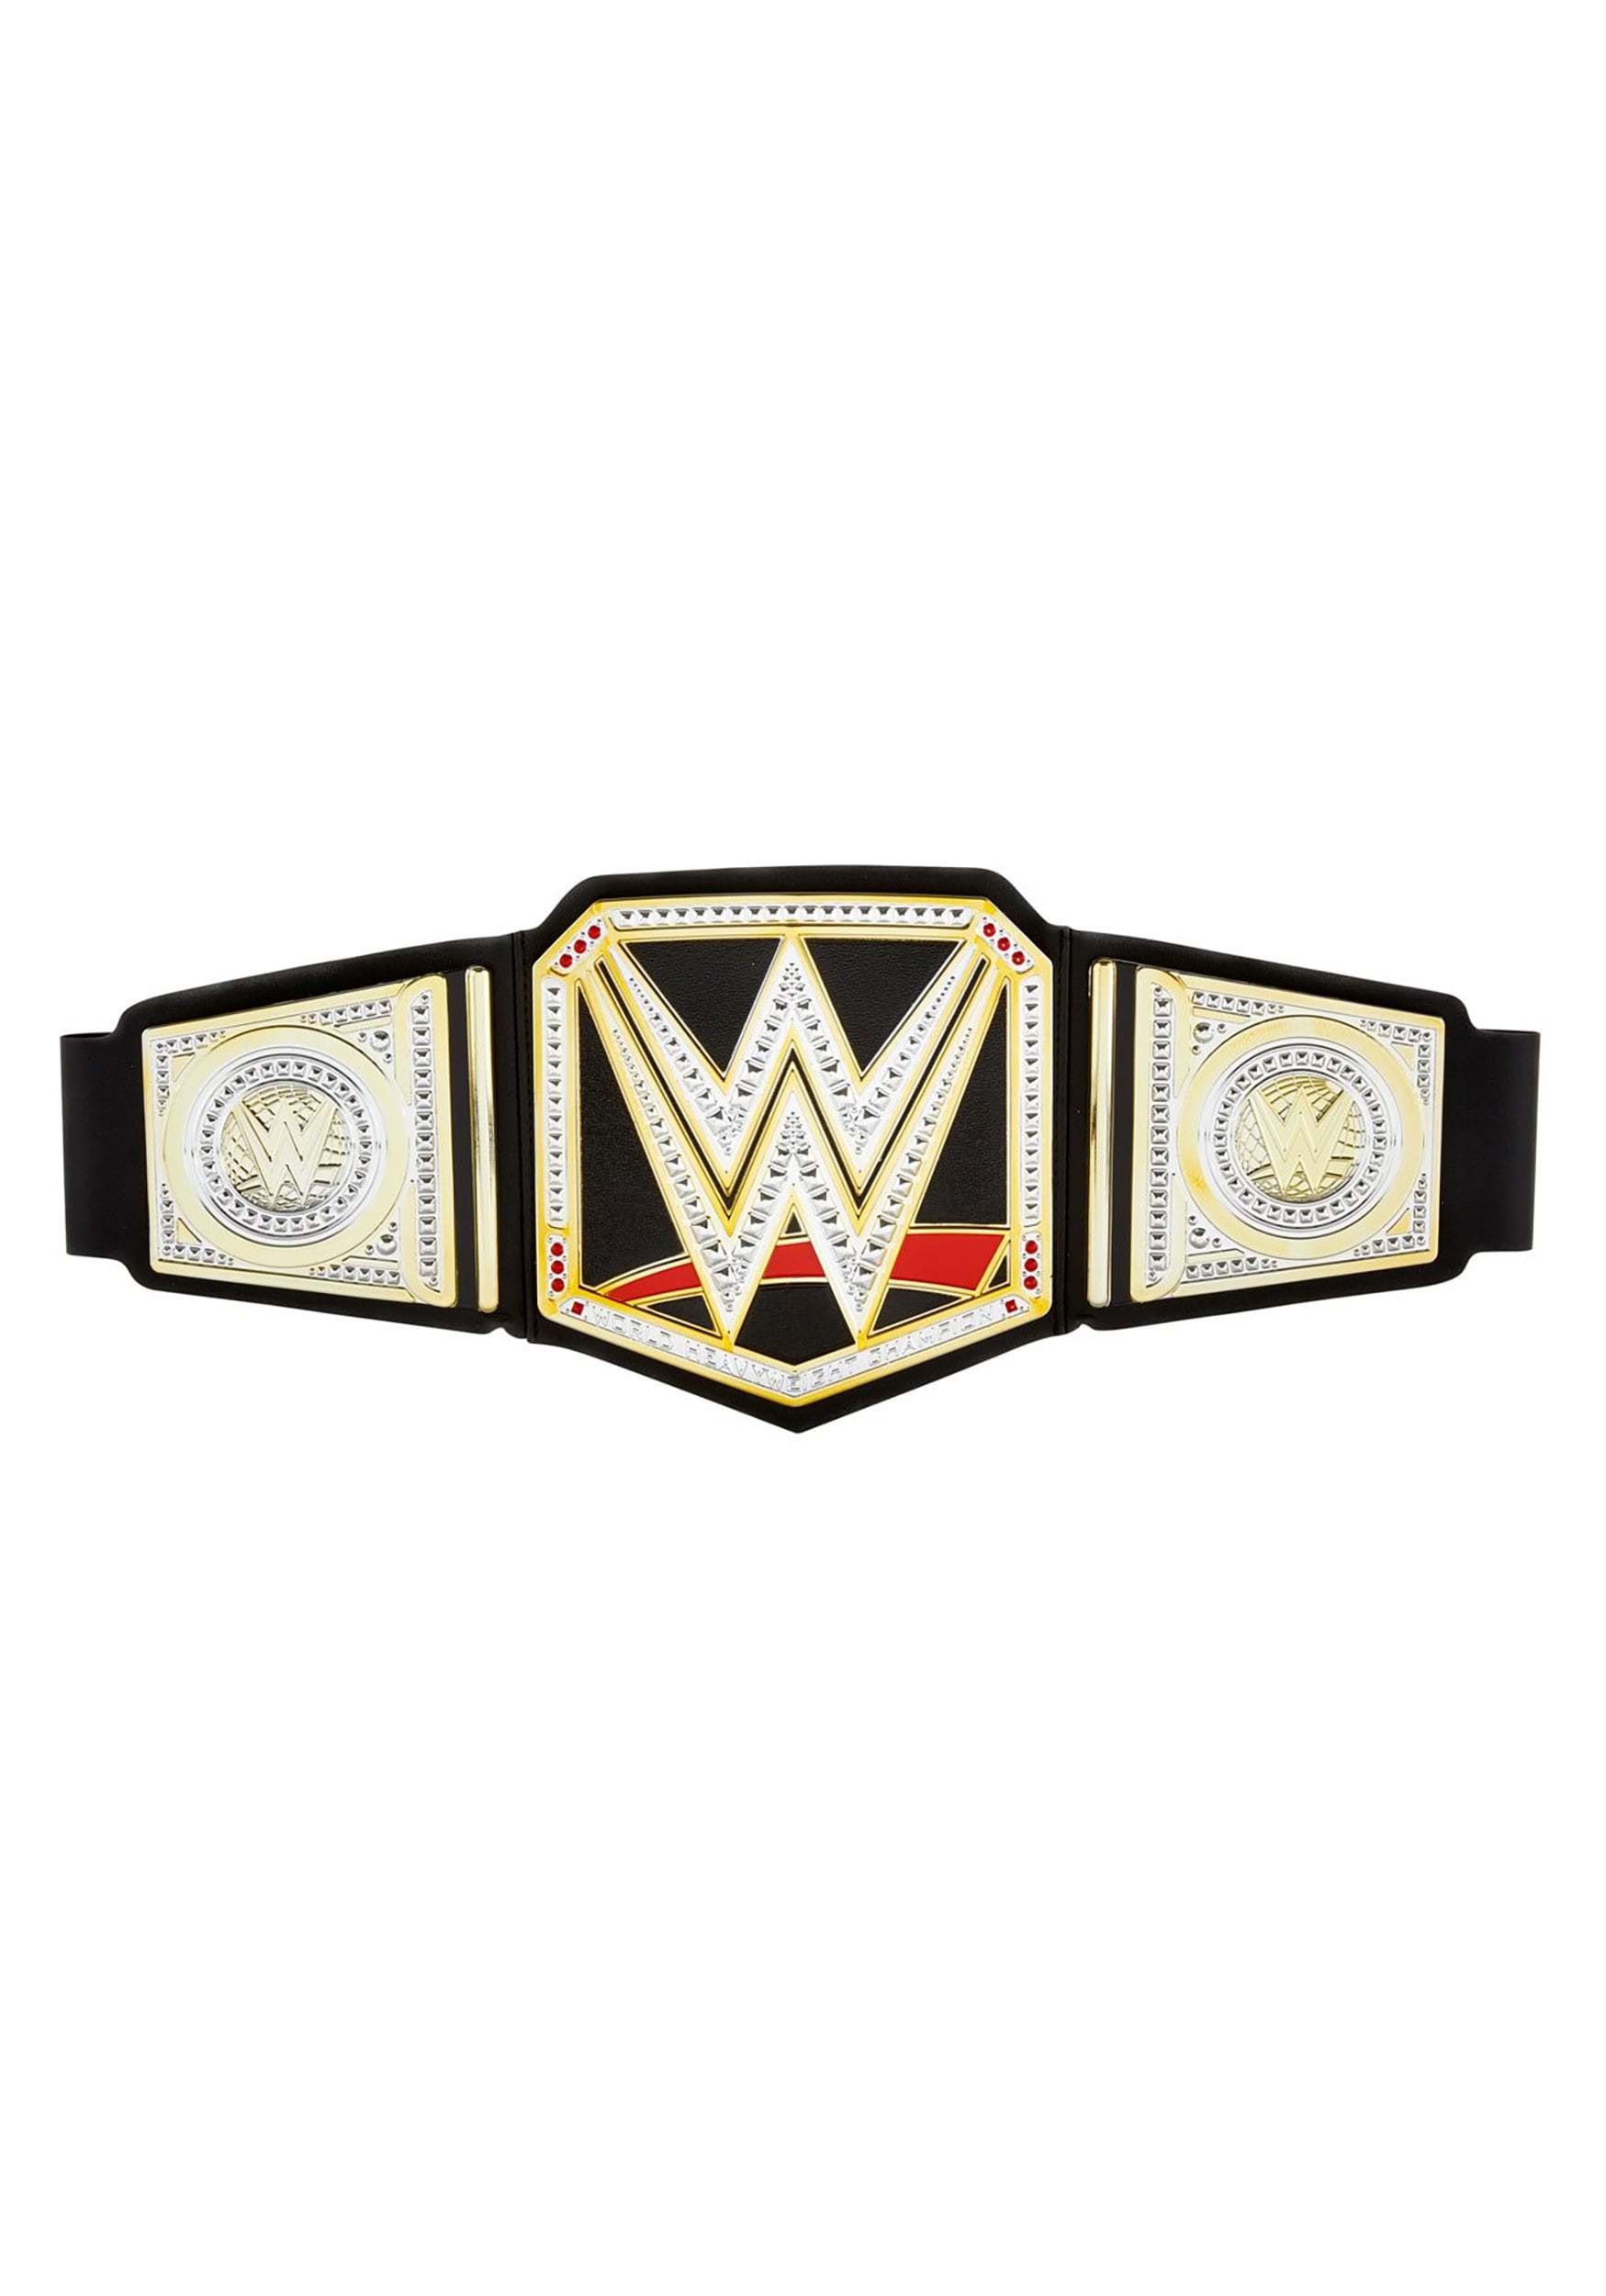 Roleplay WWE Championship Belt | WWE Accessories